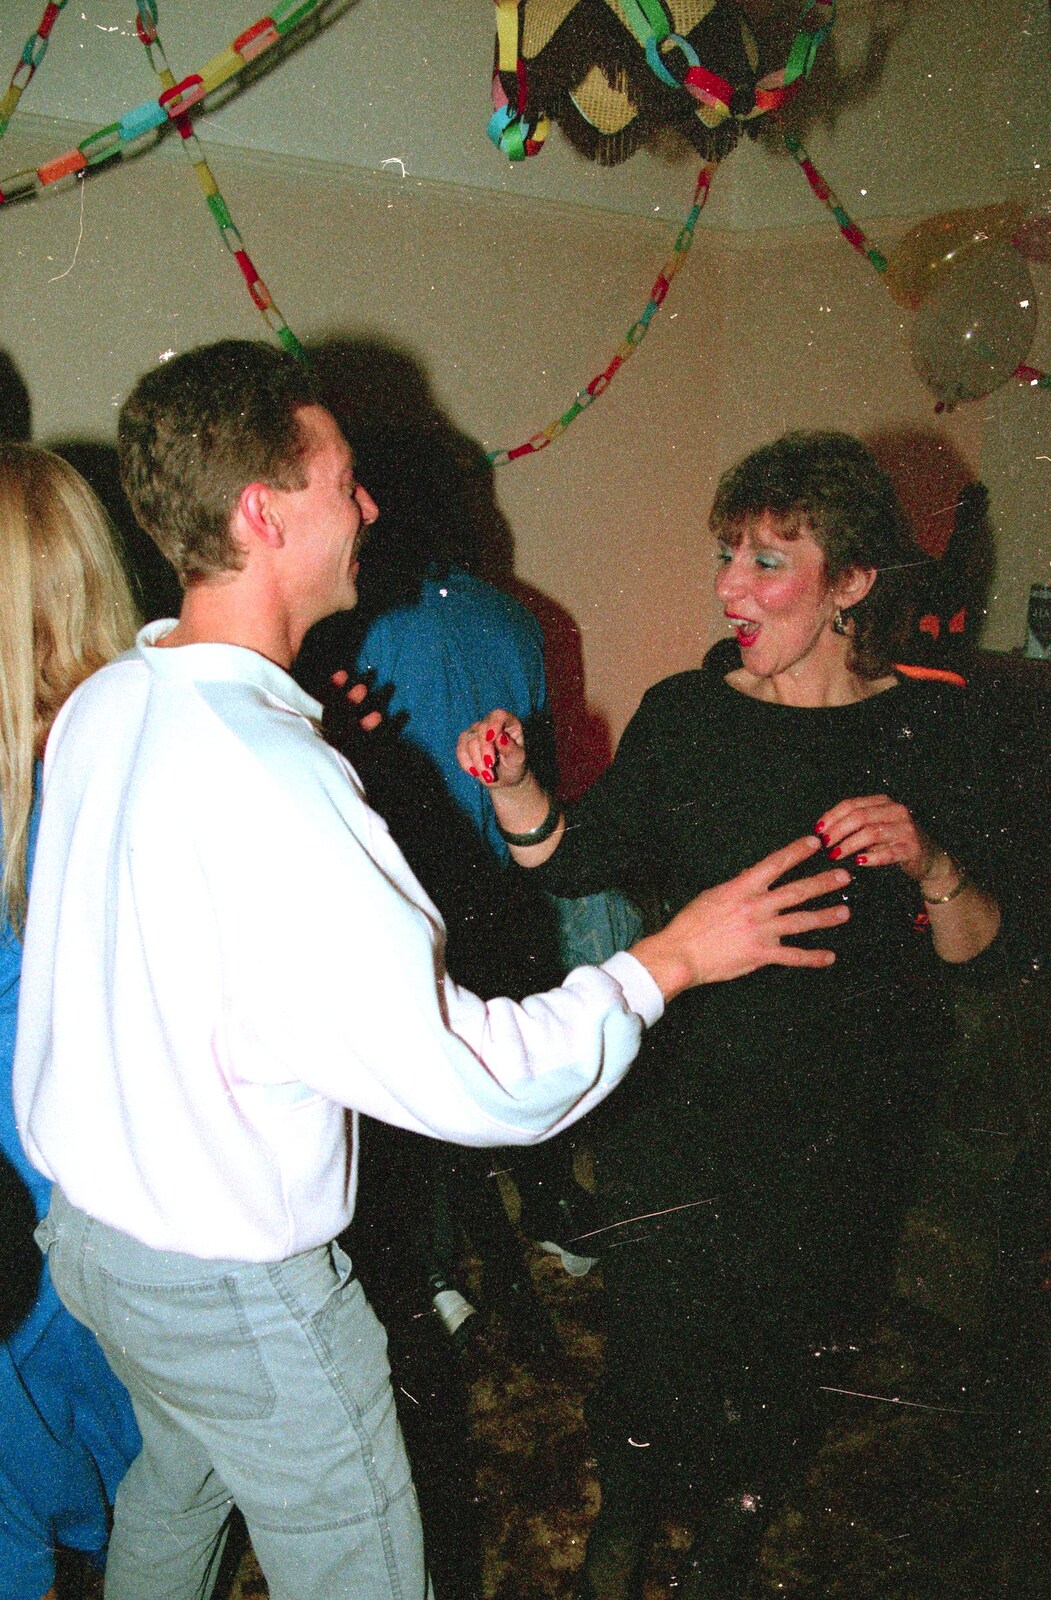 Mark Hill 'removals' and his missus do dancing from A Valentine Street Christmas, Norwich, Norfolk - 17th December 1987